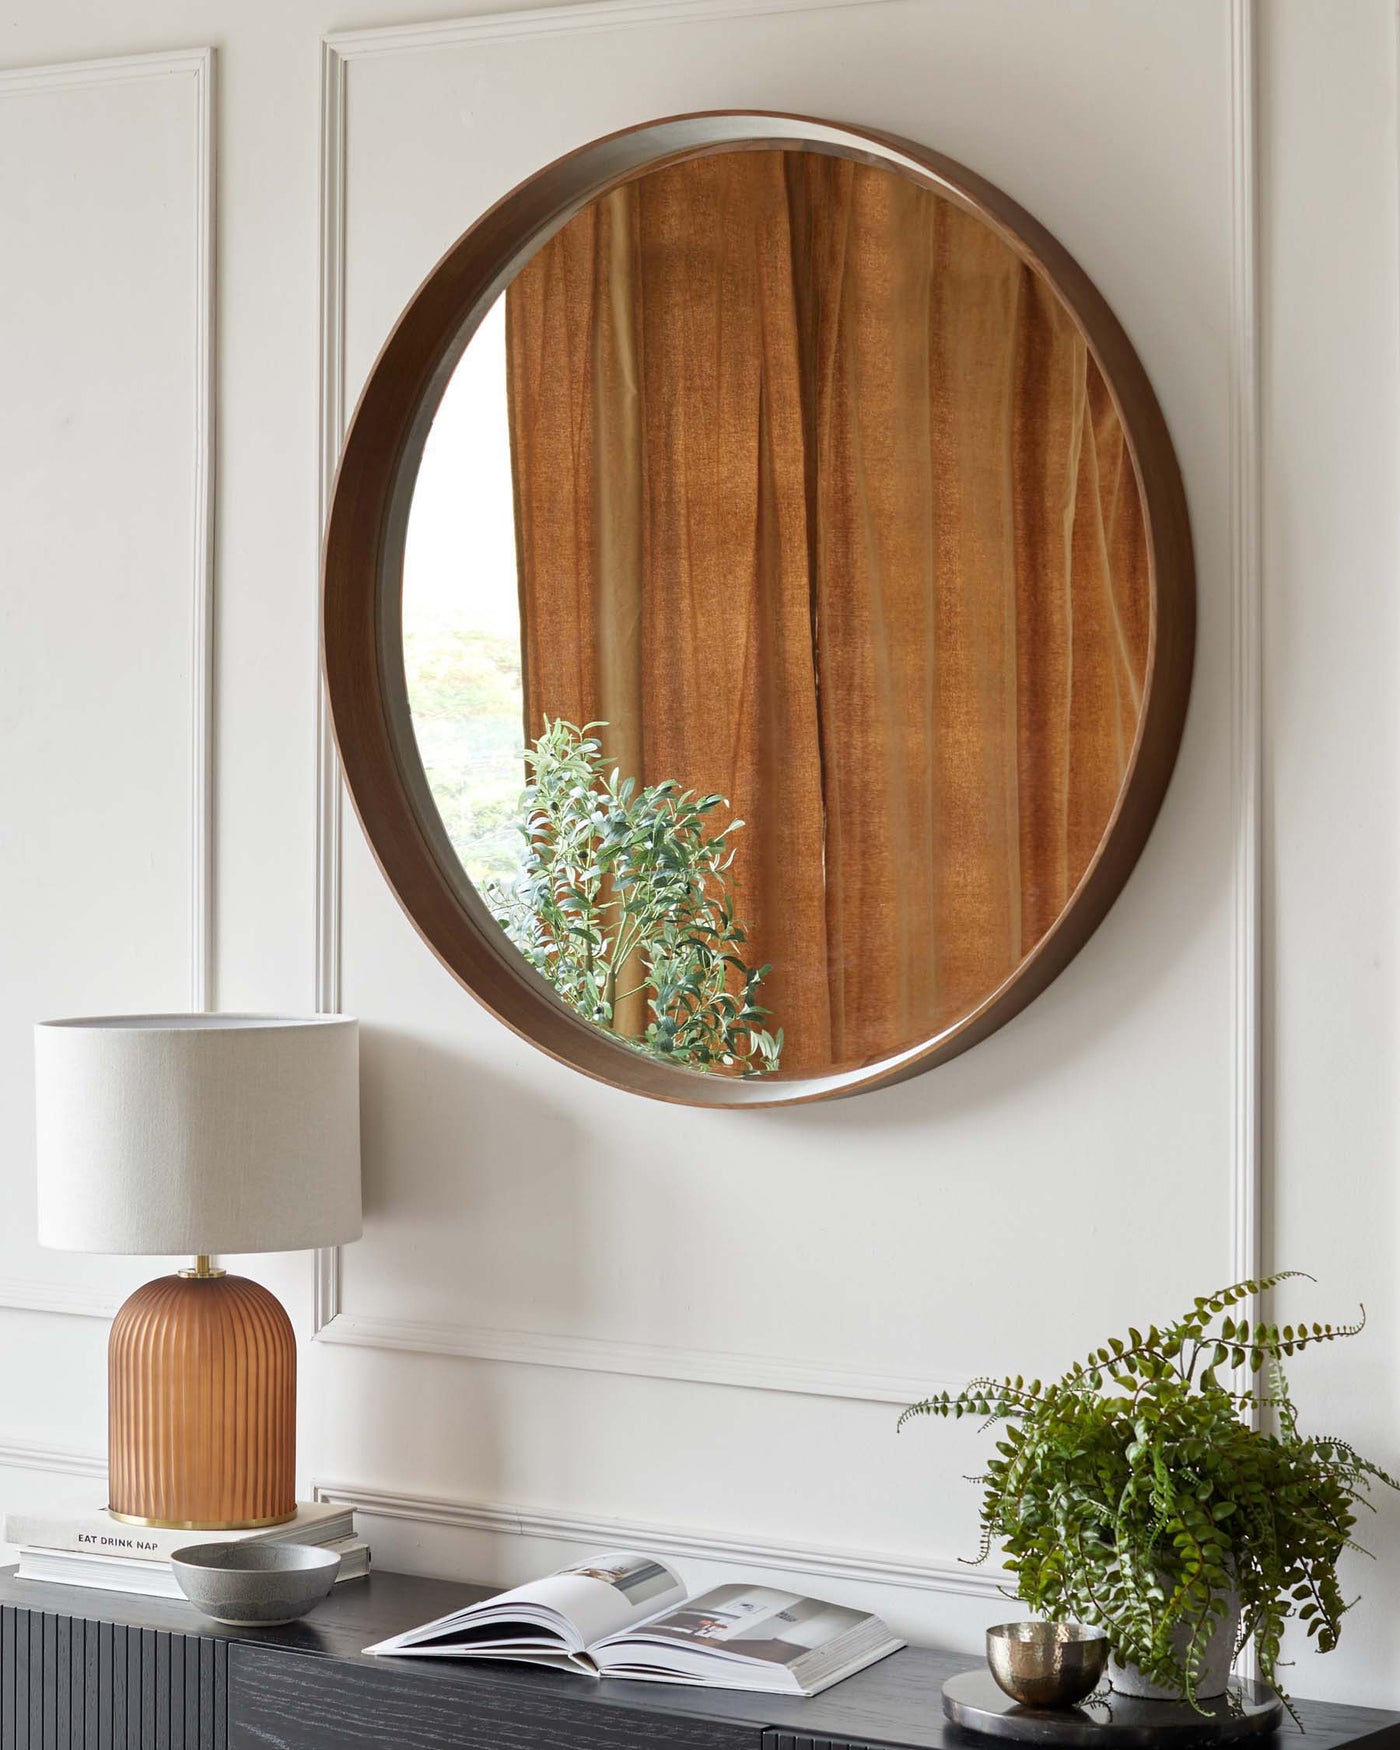 A modern ribbed ceramic table lamp with a cream-colored drum shade, set on a black wooden sideboard with minimalistic styling. A round, wall-mounted decorative mirror with a wooden frame and metallic trim is visible above. A potted fern and an open magazine are also atop the sideboard, adding organic touches to the scene.